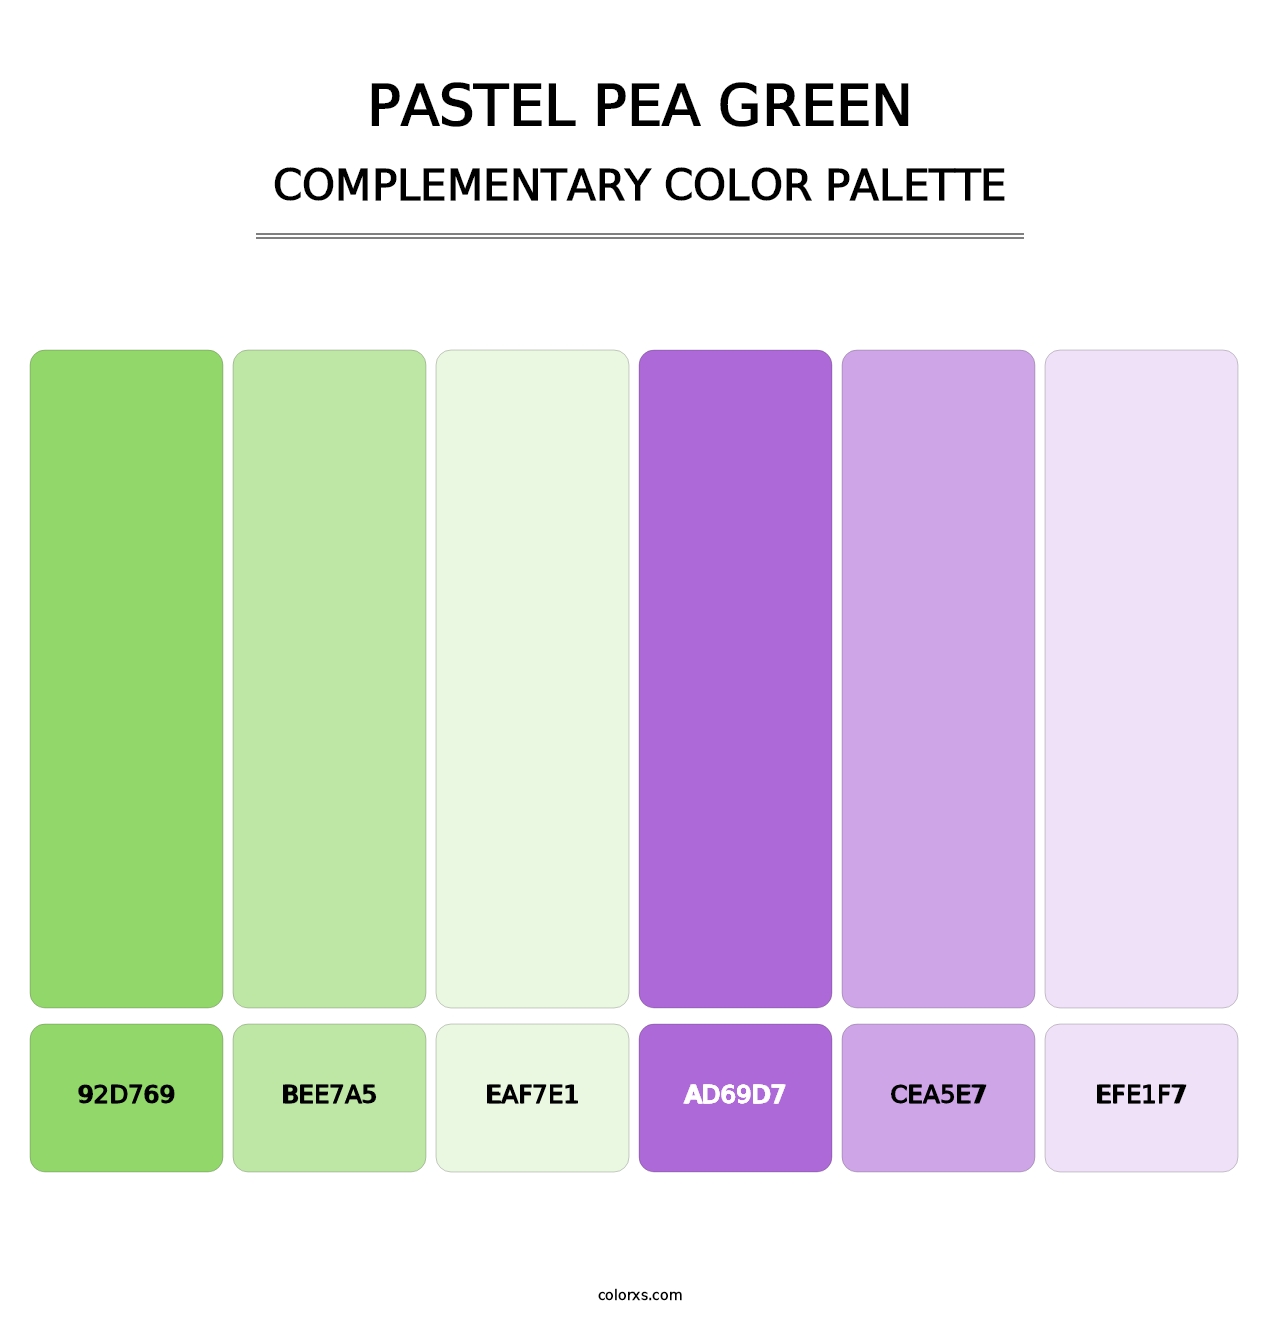 Pastel Pea Green - Complementary Color Palette